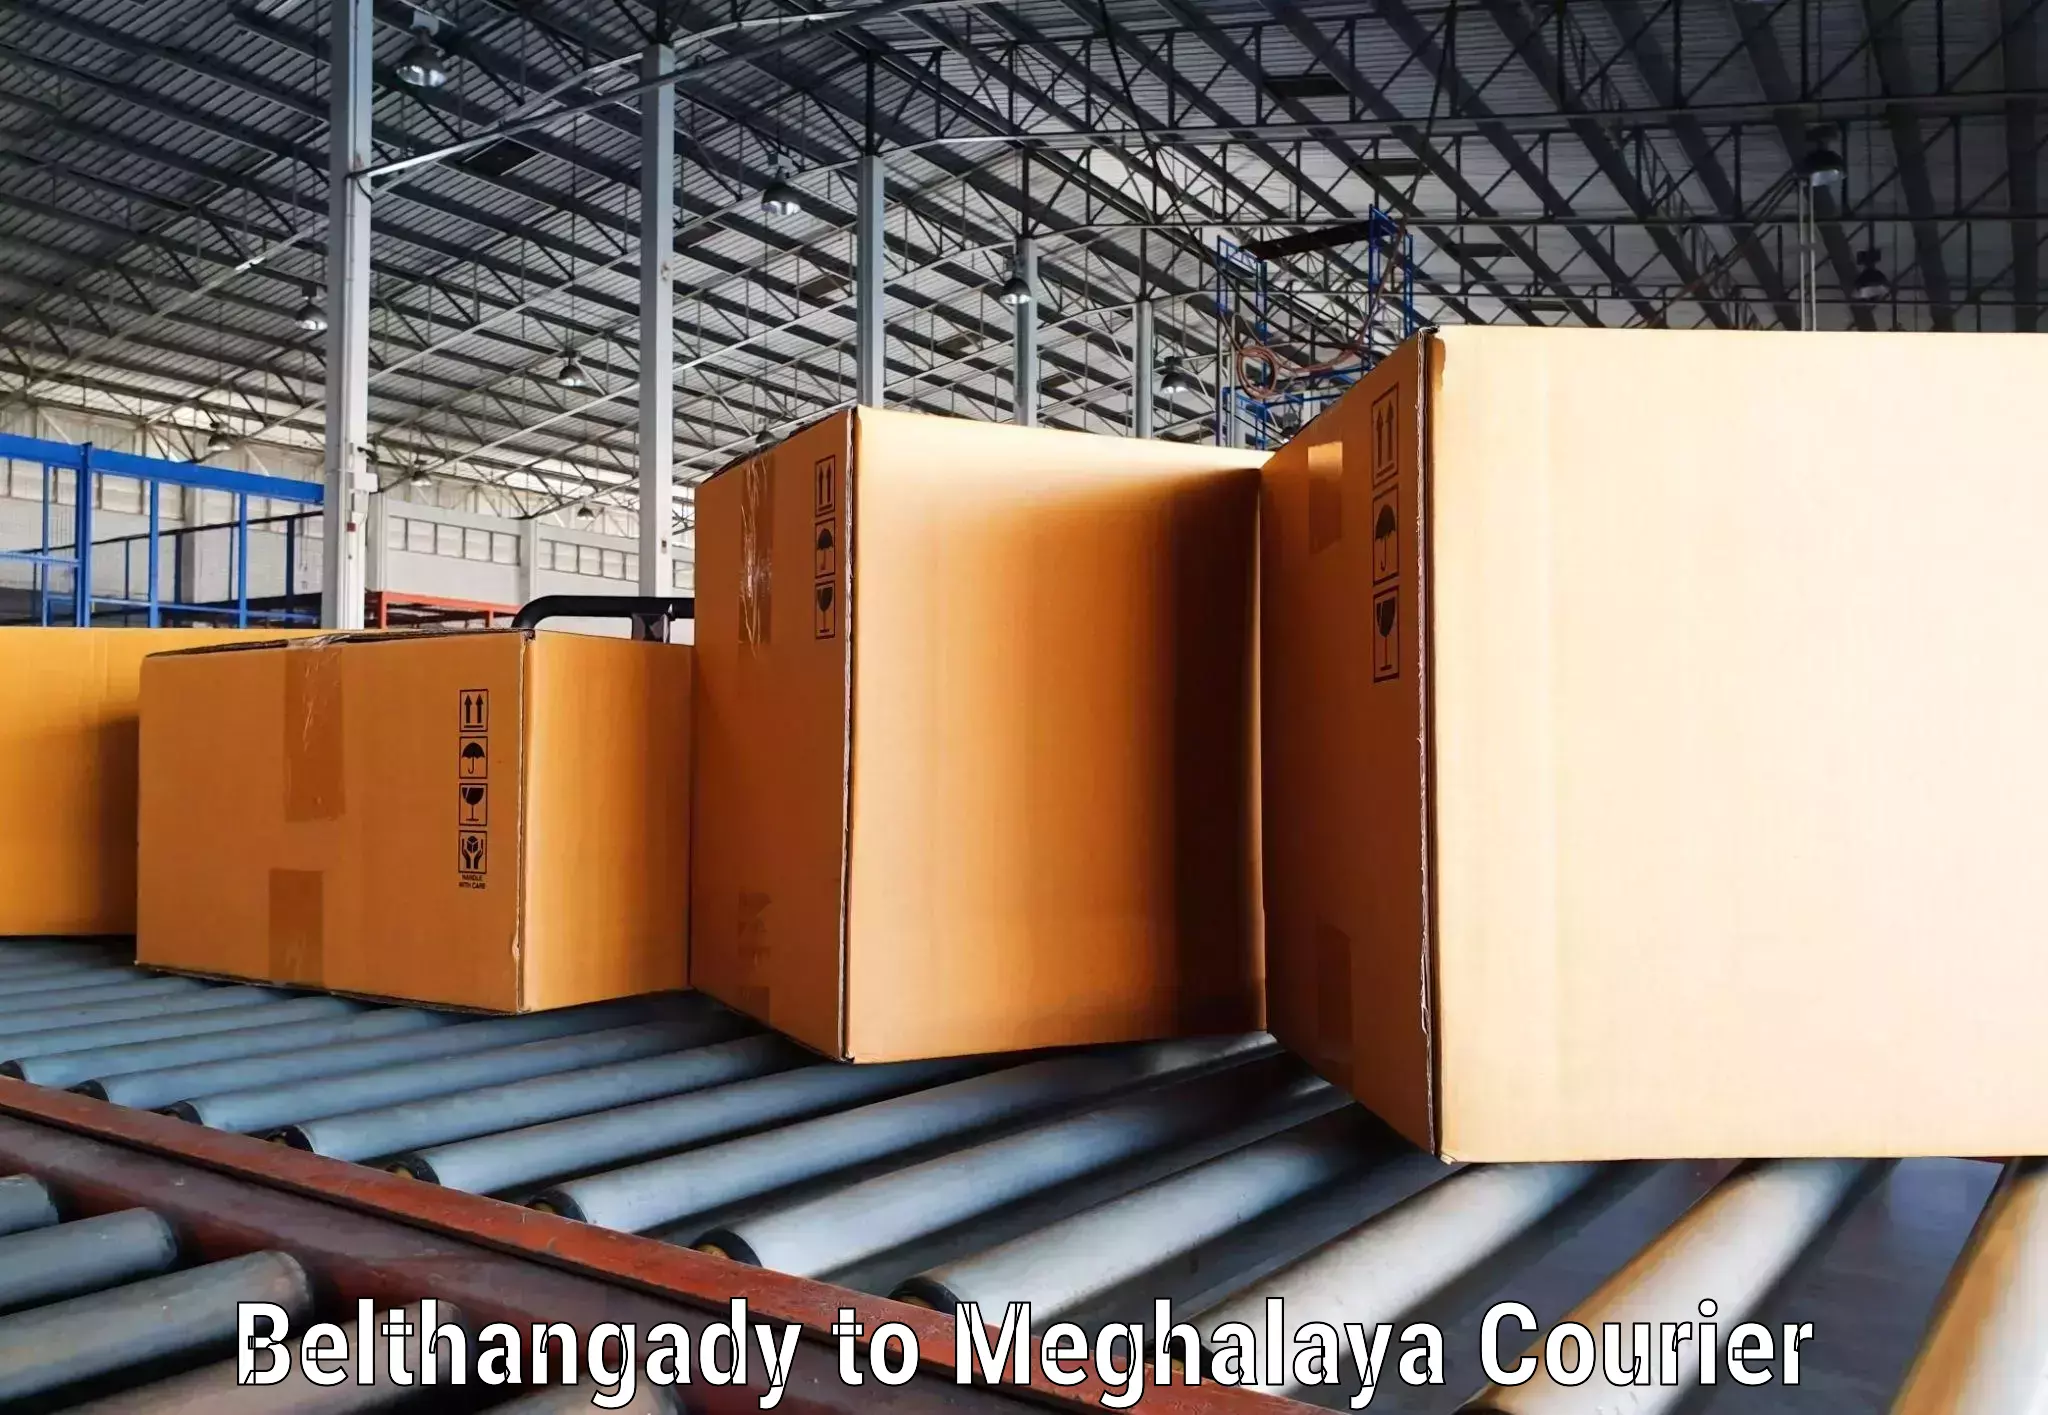 Reliable logistics providers Belthangady to Shillong